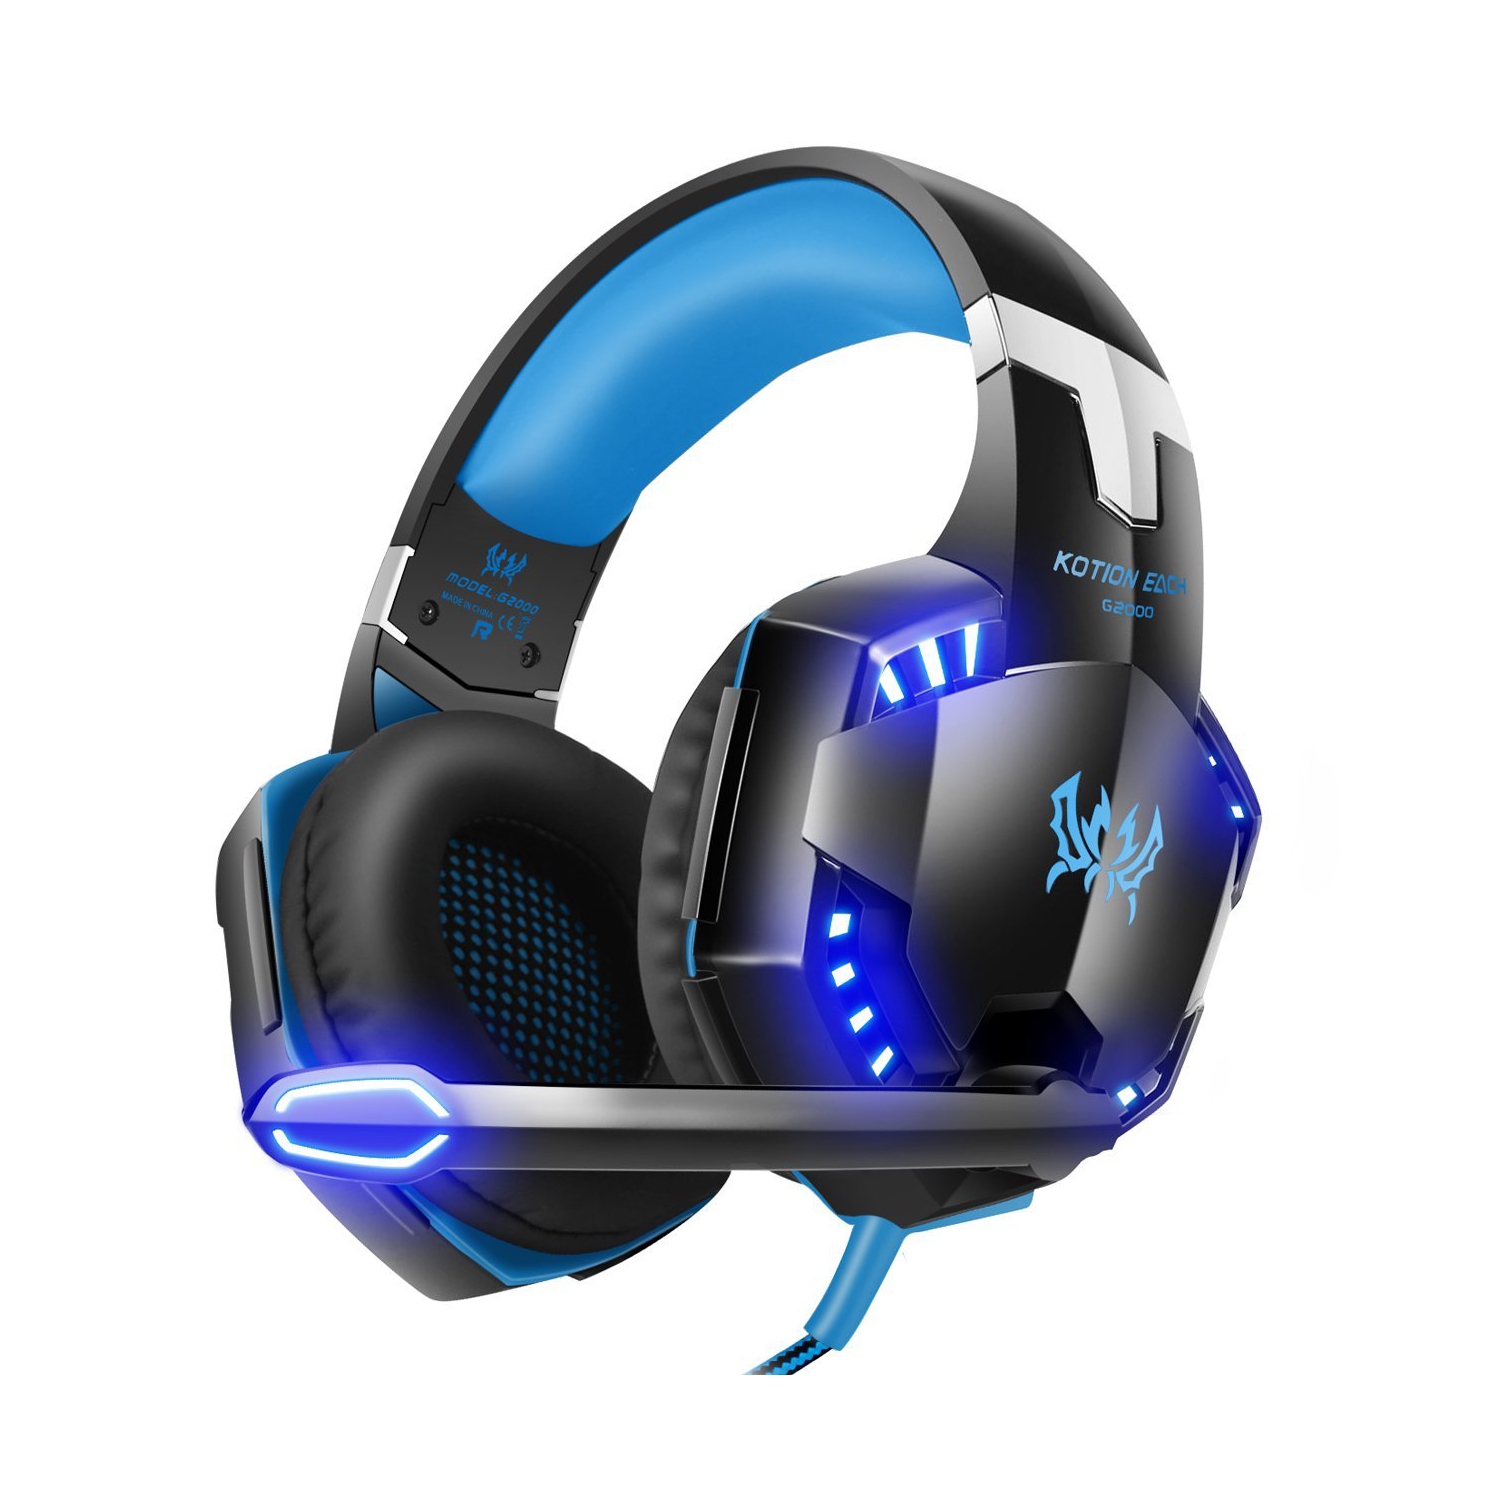 VersionTECH G2000 Noise-Reduction Gaming Headset for PS4, Xbox One, PC - Black/Blue